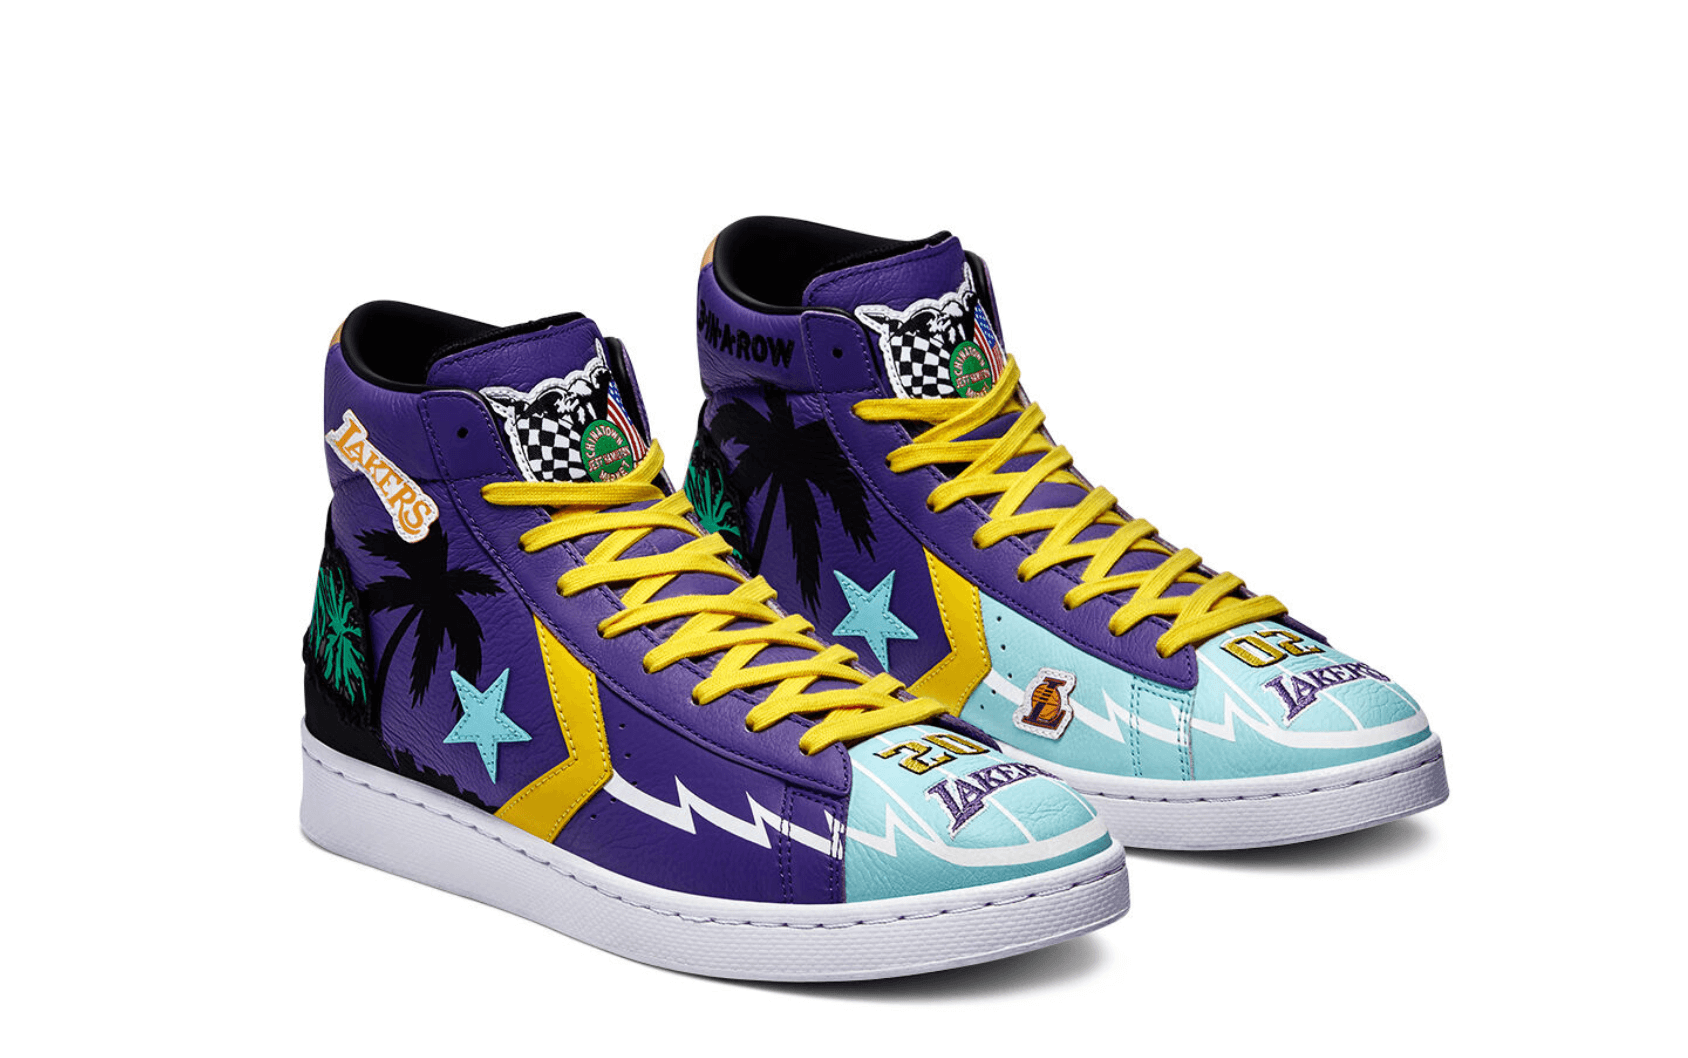 Converse x Chinatown Market “Lakers Championship Jacket” Pro Leather High Top 2021 